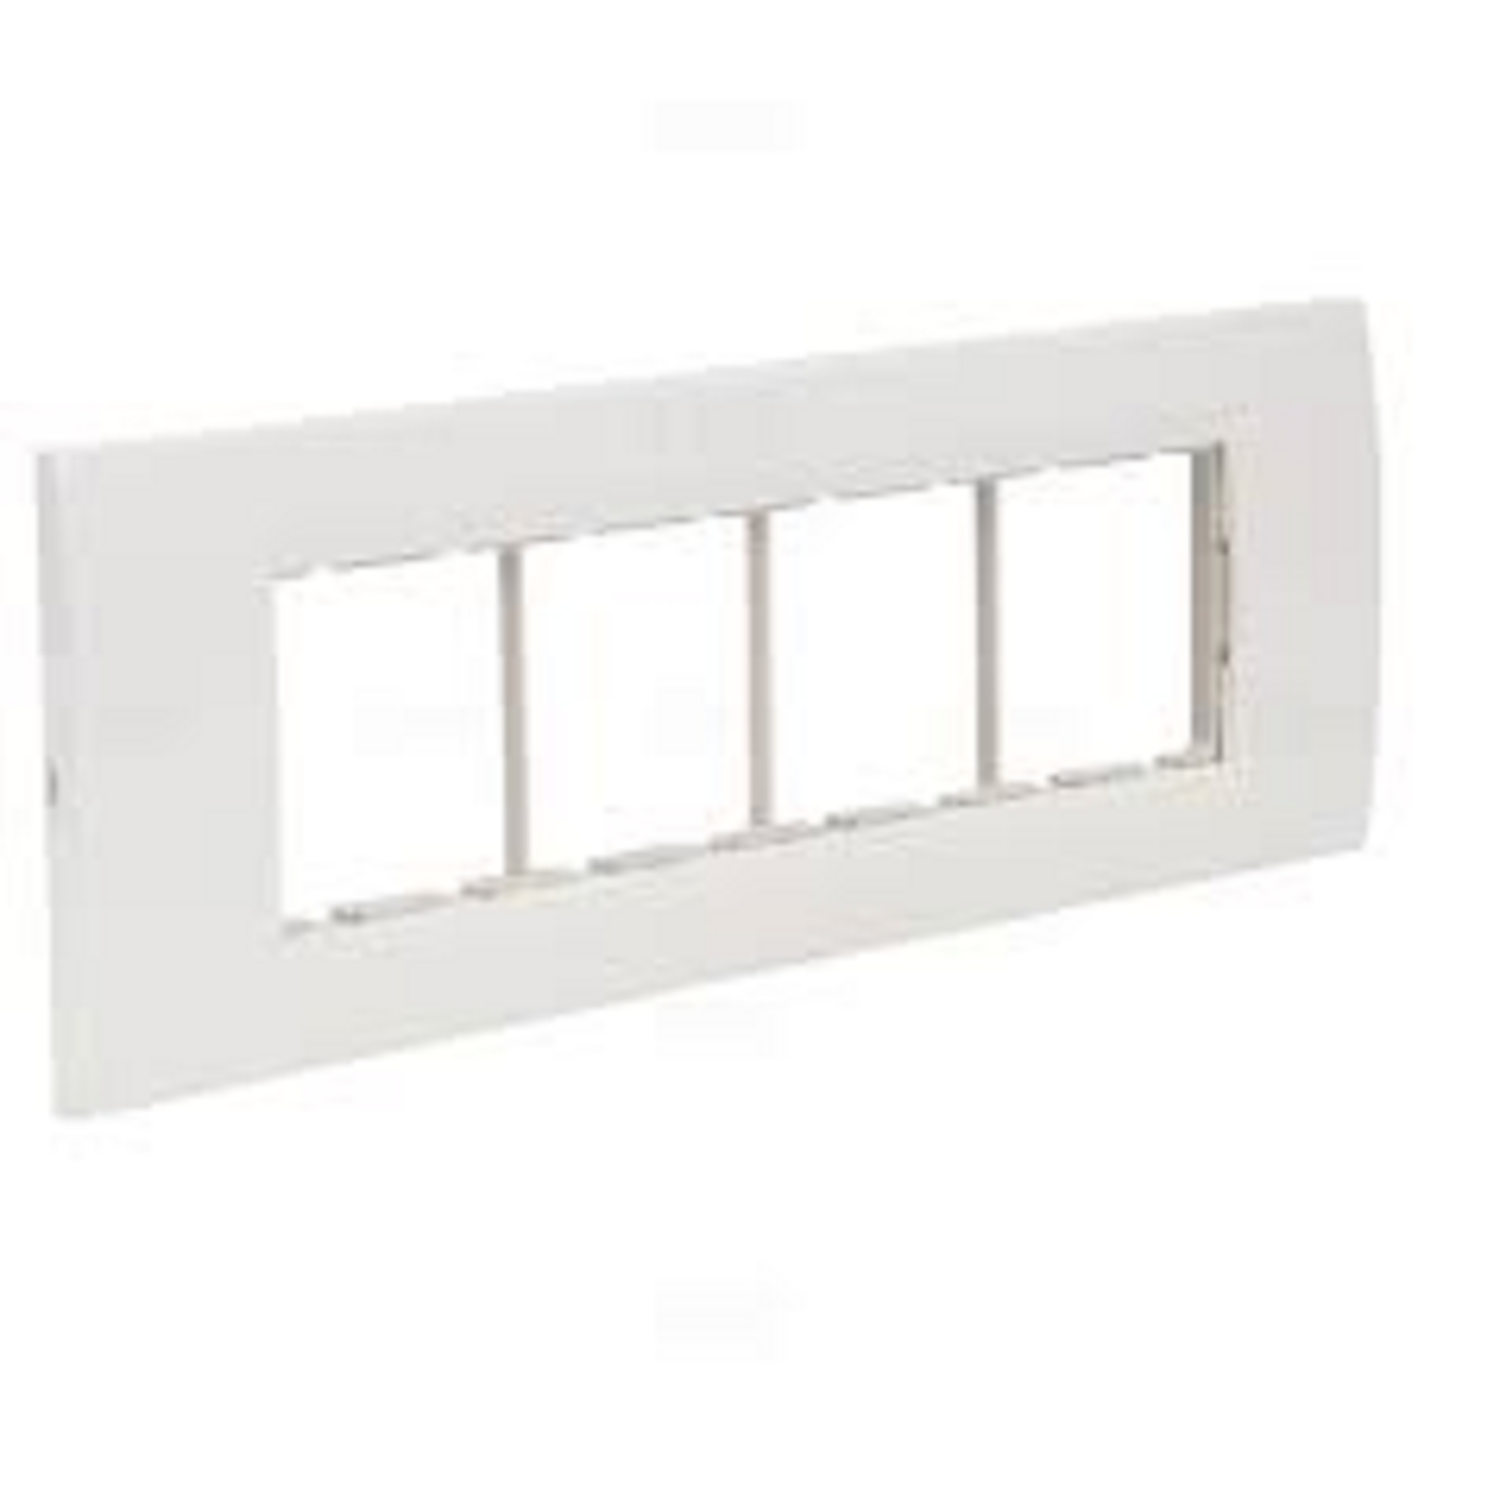 GreatWhite Fiana 8(HZ) Module Cover Plate with Base Frame - White